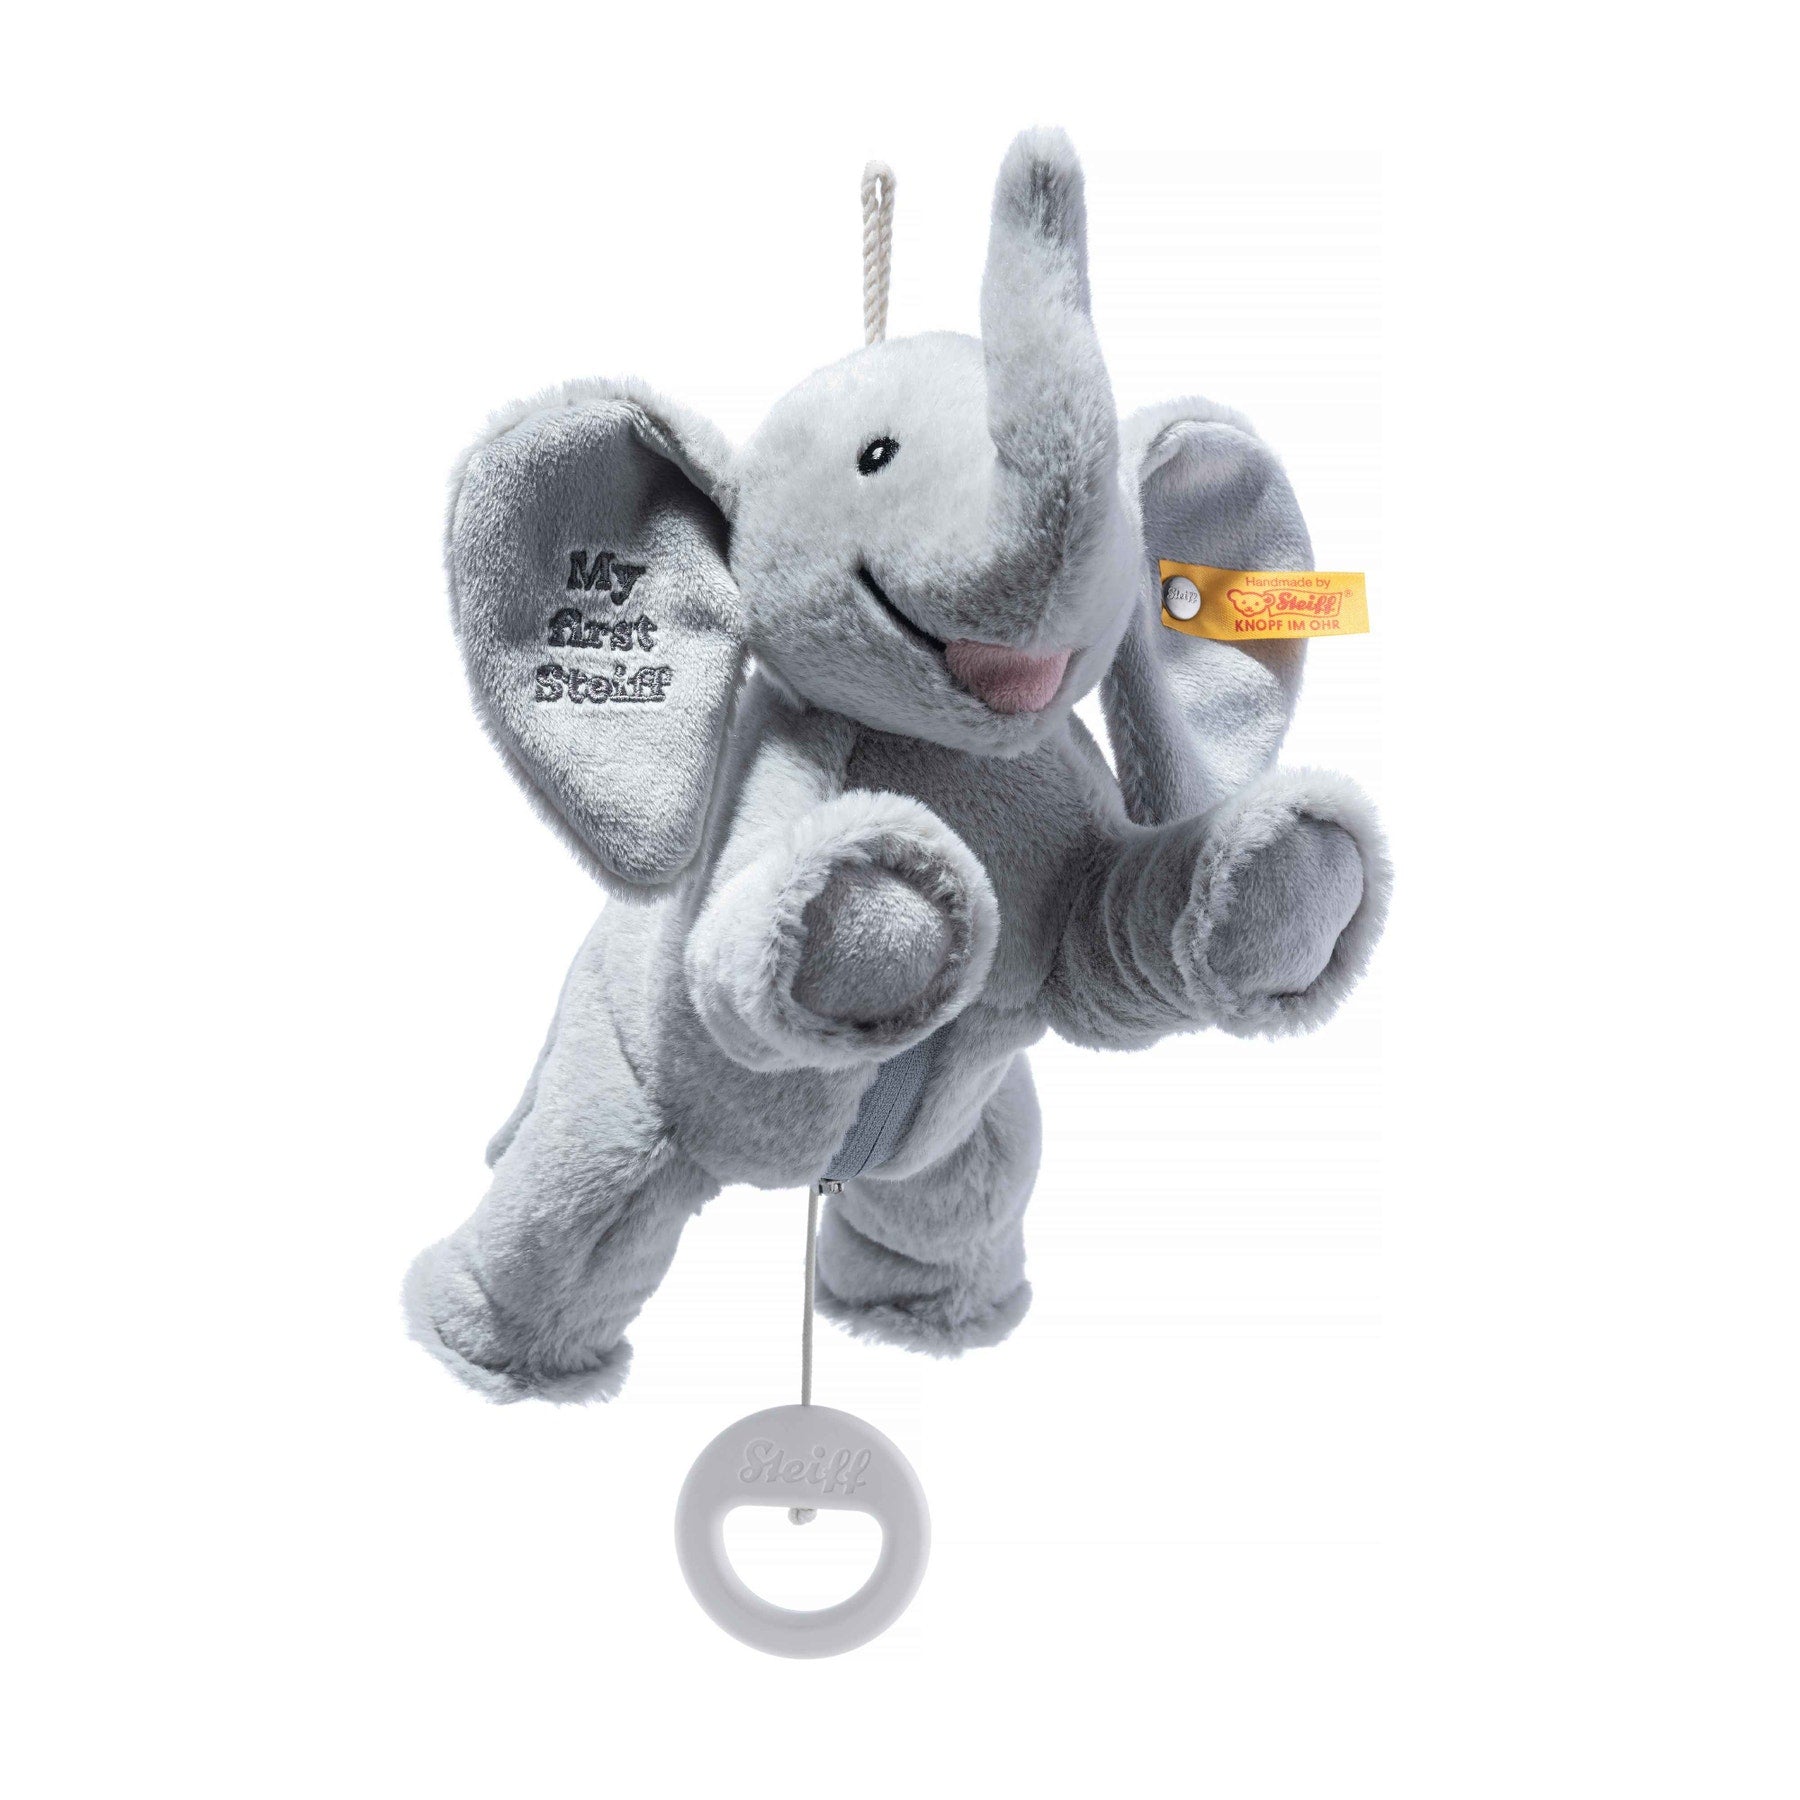 Elephant soft toy with pull-cord, 'My First Steiff' embroidery and an authentic Steiff tag